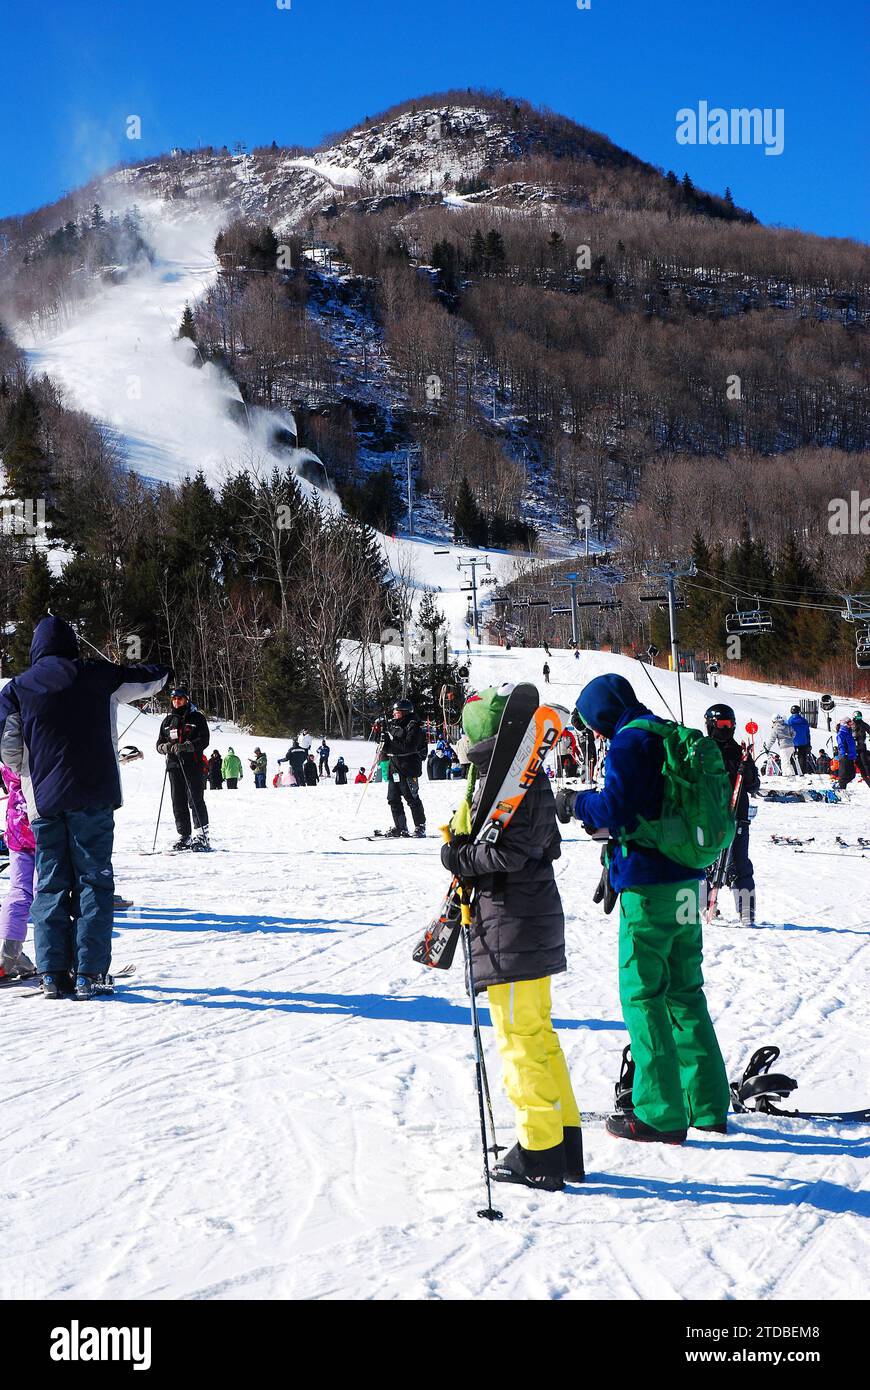 A group of skiers prepare to take on the slopes Stock Photo